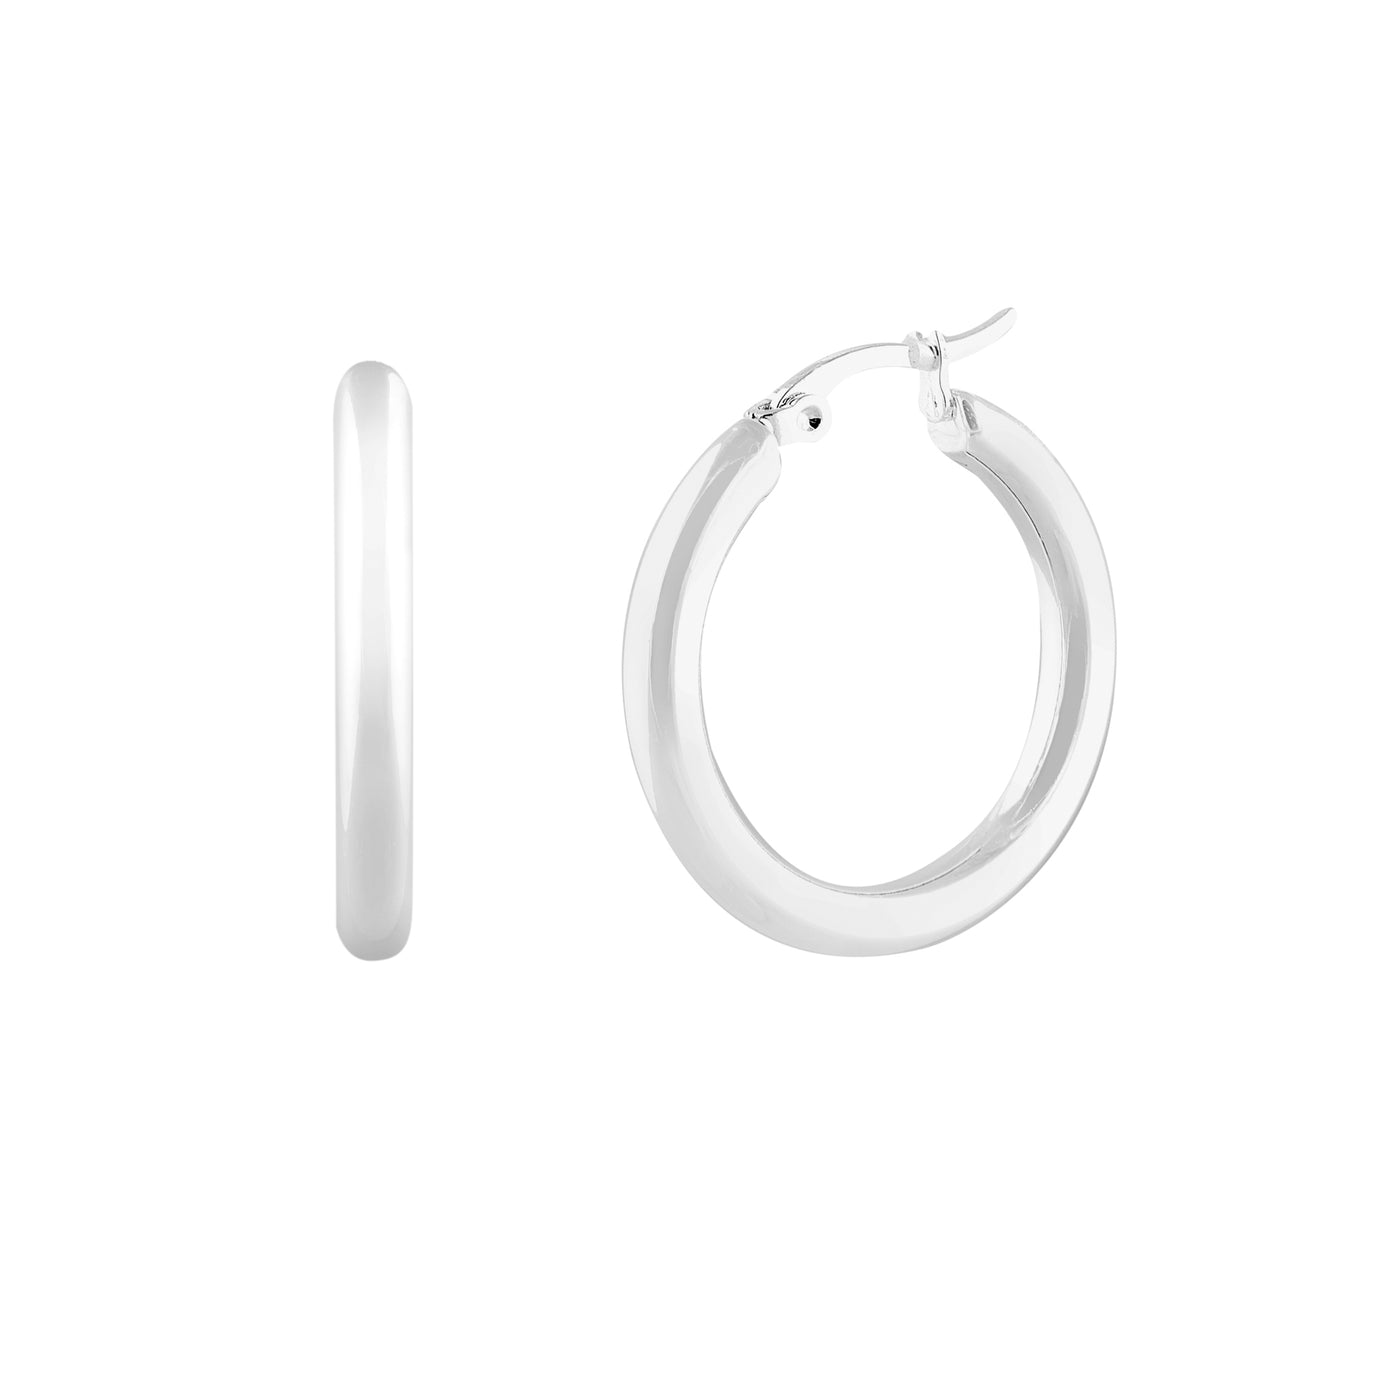 Hailey Hoops - White Silver